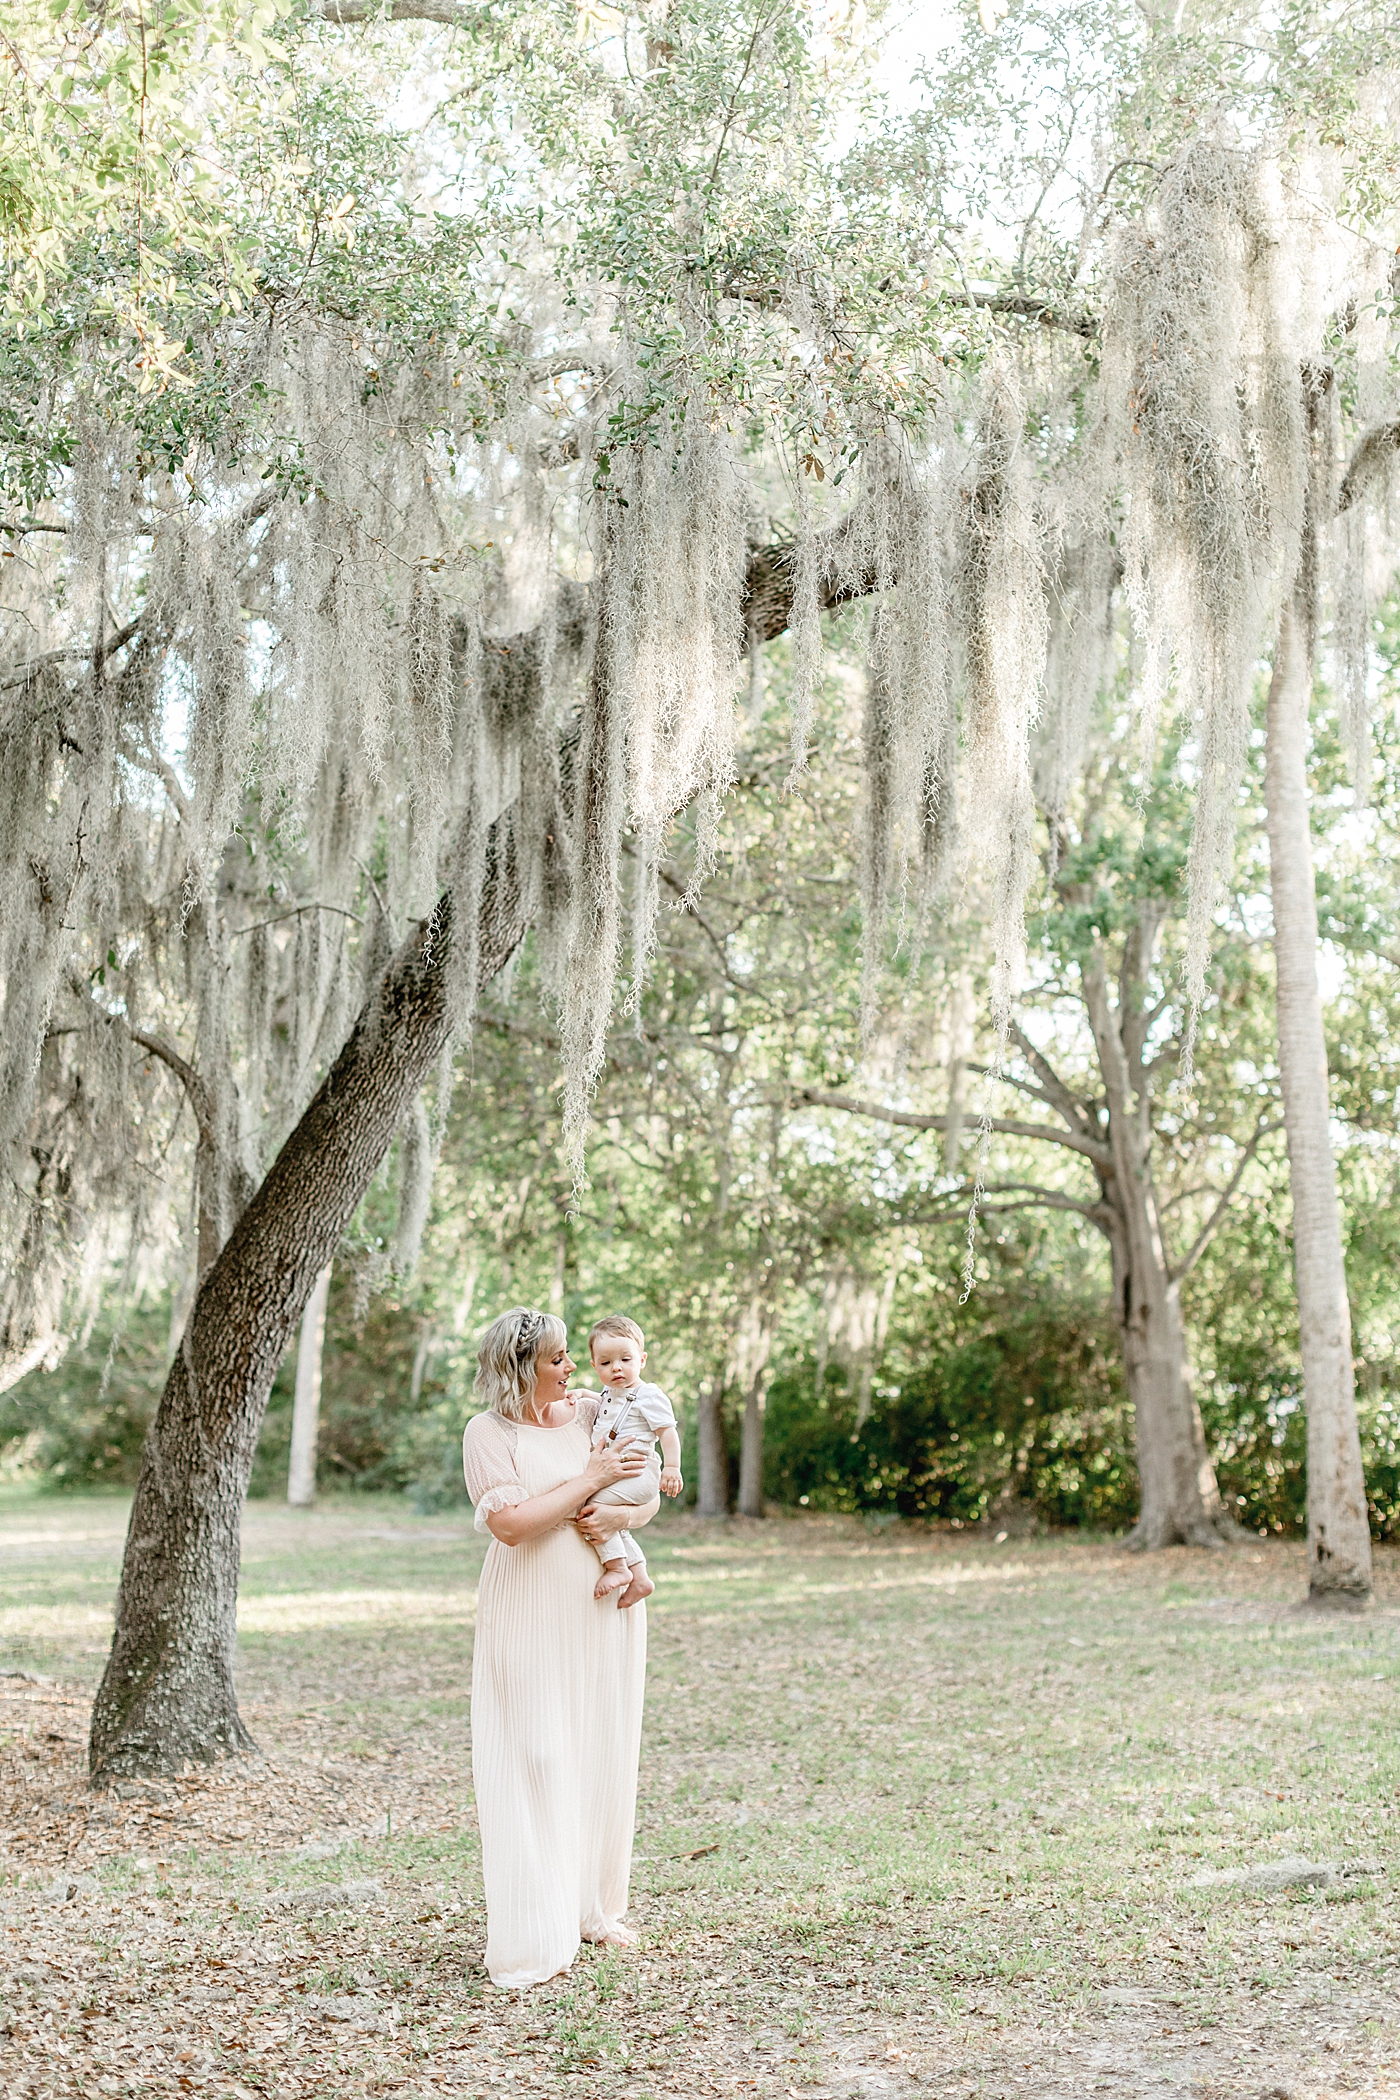 Mom is holding her son walking under the oak trees. Photo by Brittany Elise Photography.